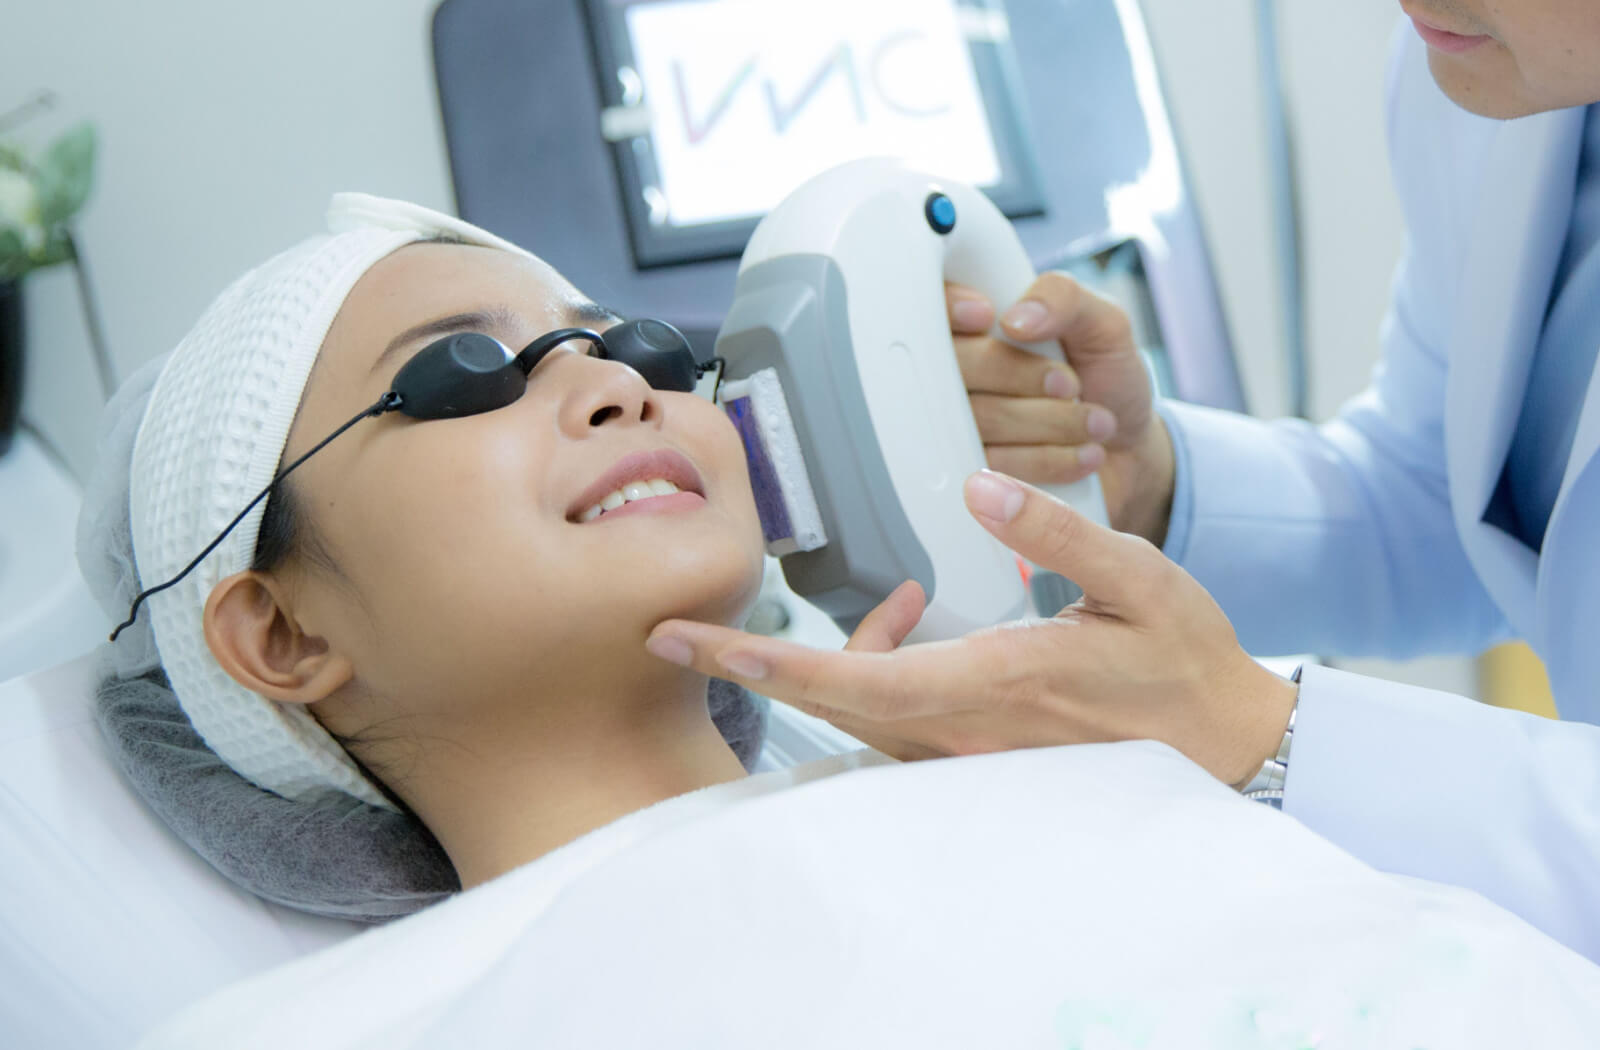 A smiling, reclined patient wearing goggles receiving IPL treatments on her face from her optometrist